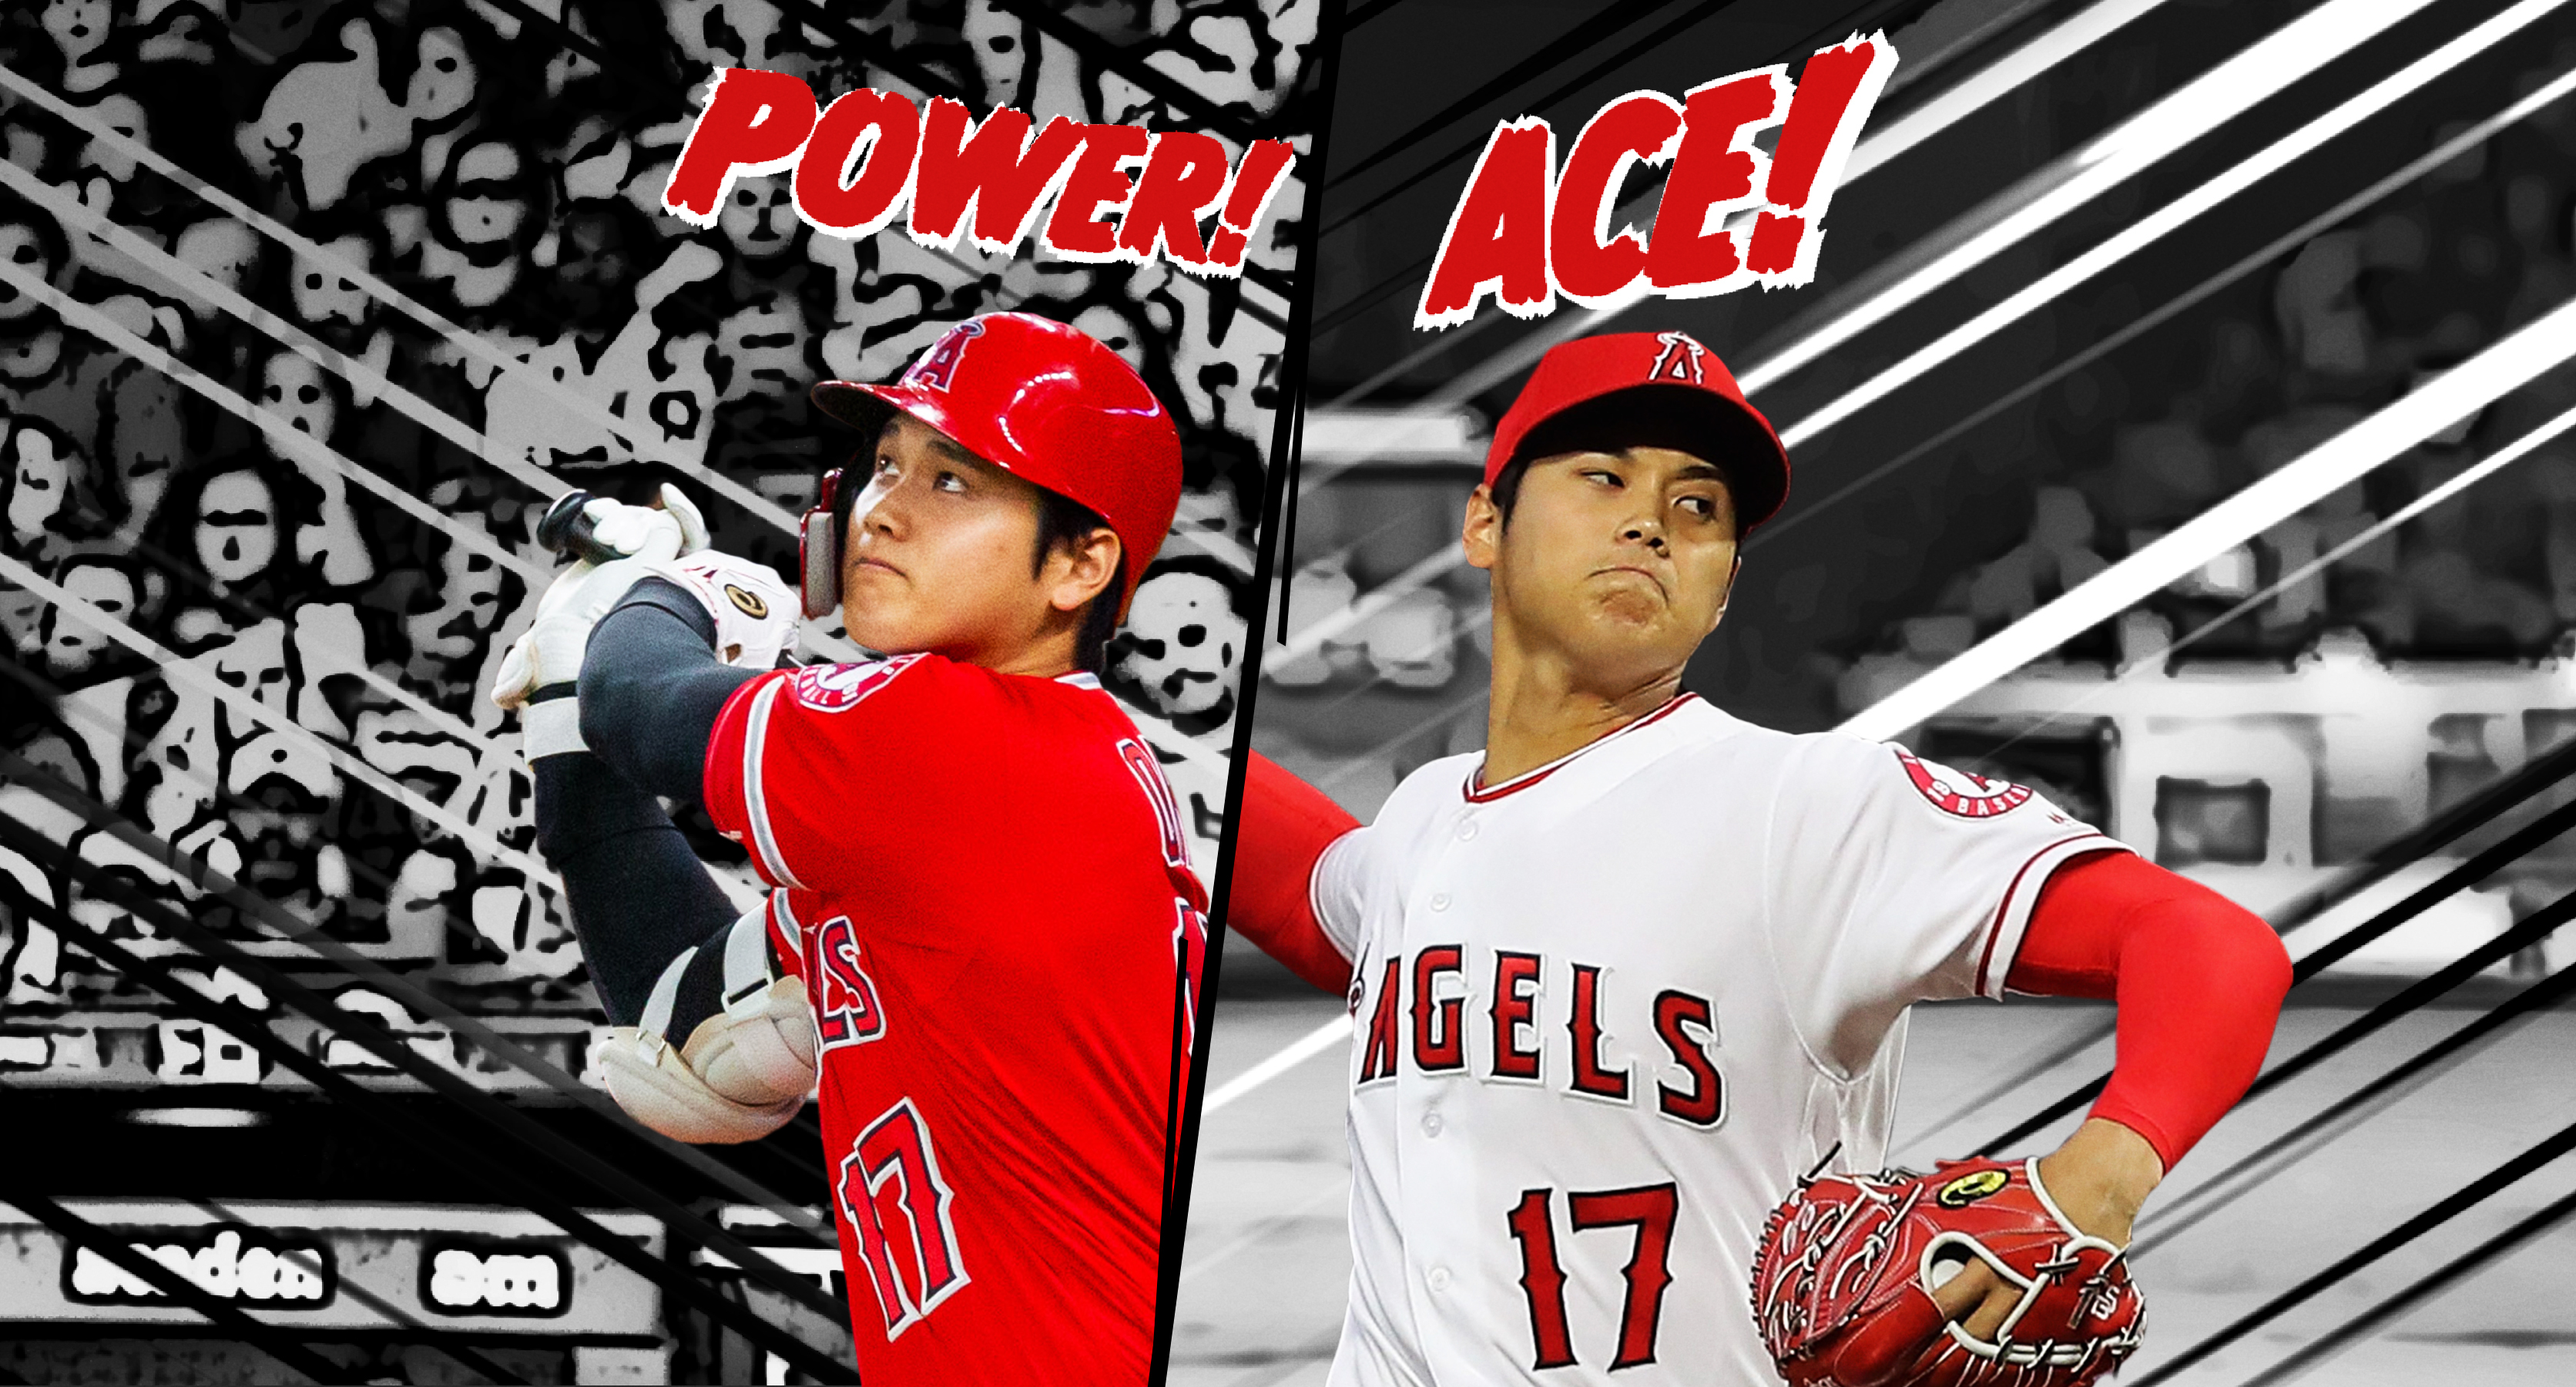 Mlb shohei ohtani returns to pitching chases babe ruth